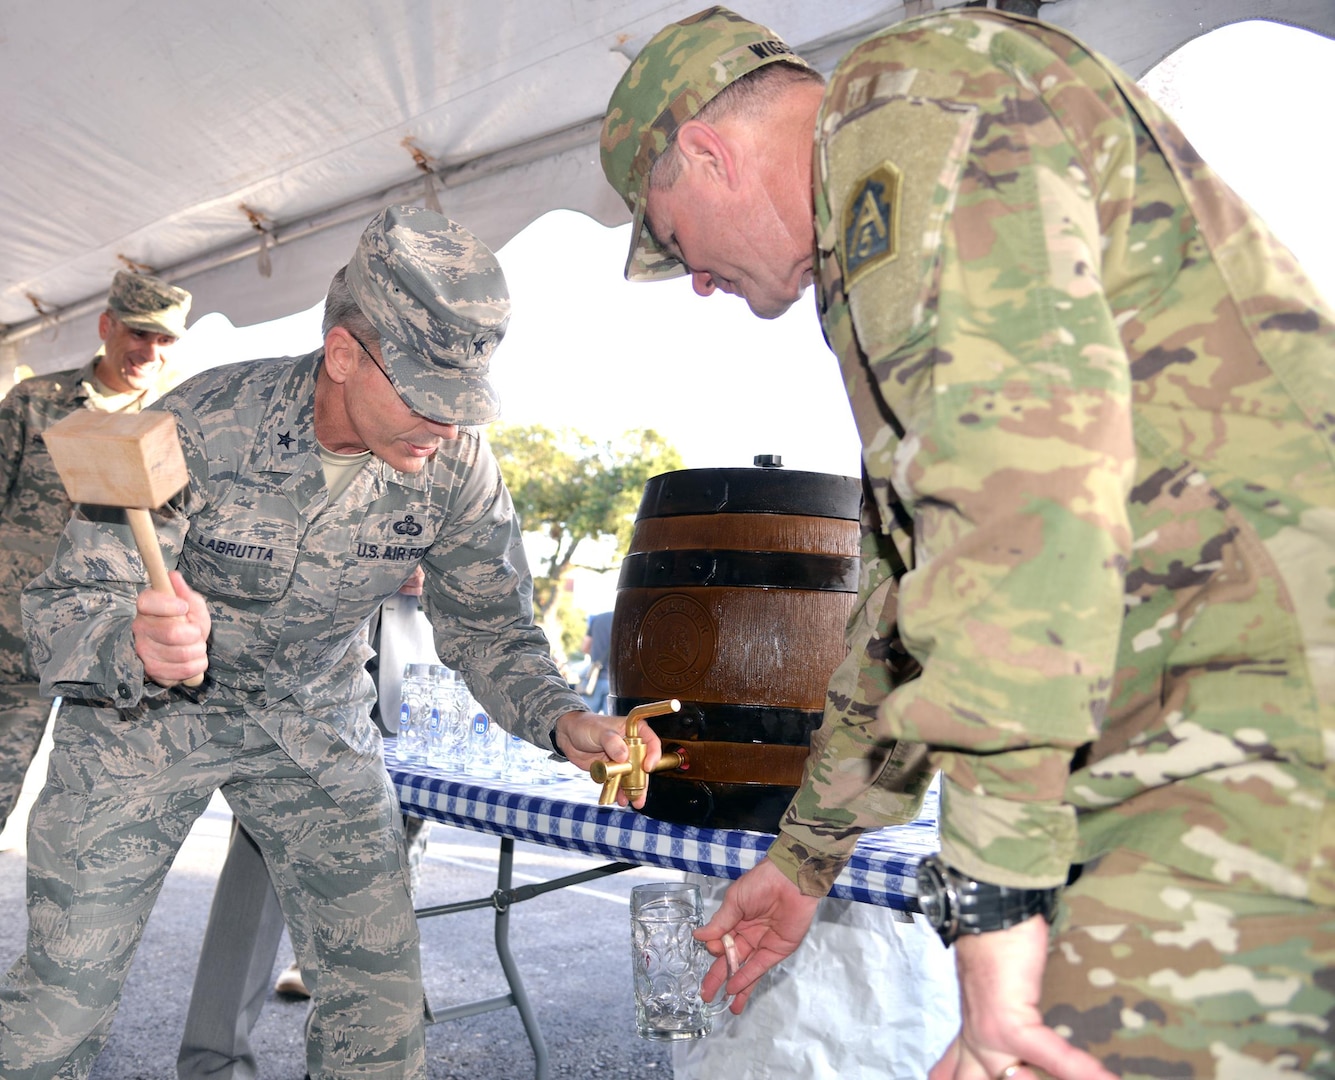 Air Force Brig. Gen. Bob LaBrutta (right) gets ready for the ceremonial tapping of the keg while Army Lt. Gen. Perry Wiggins (left) awaits the first stein of beer Friday at the start of the annual Joint Base San Antonio-Fort Sam Houston Oktoberfest celebration, which ran Friday and Saturday. LaBrutta is commander of the 502nd Air Base Wing and Joint Base San Antonio and Wiggins is commanding general of U.S. Army North (Fifth Army) and senior Army commander of Fort Sam Houston and Camp Bullis.